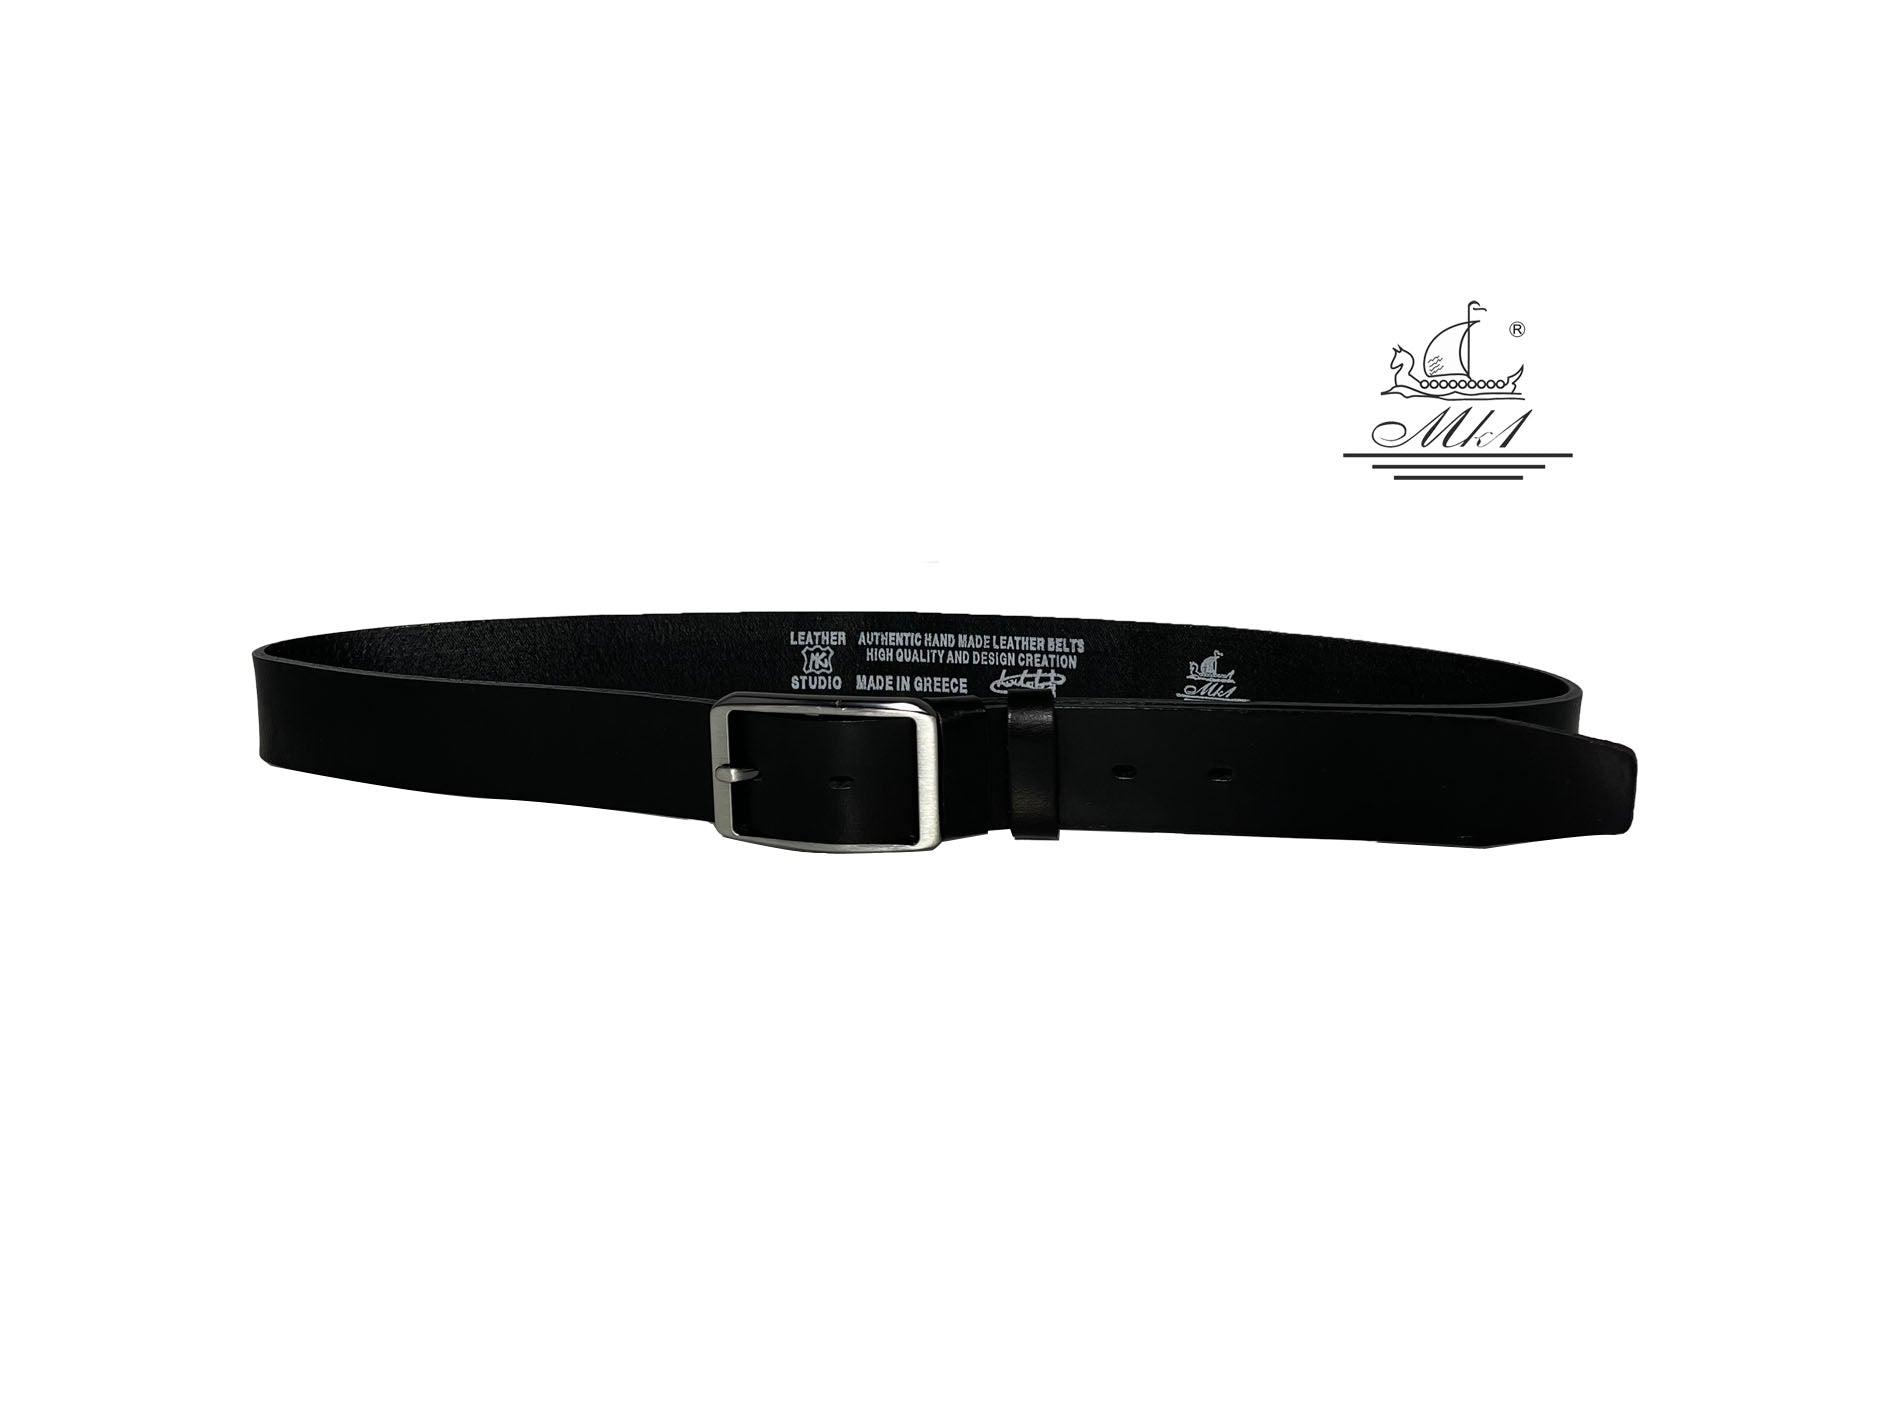 Unisex 3,5cm wide belt handcrafted from black leather. A001/35B